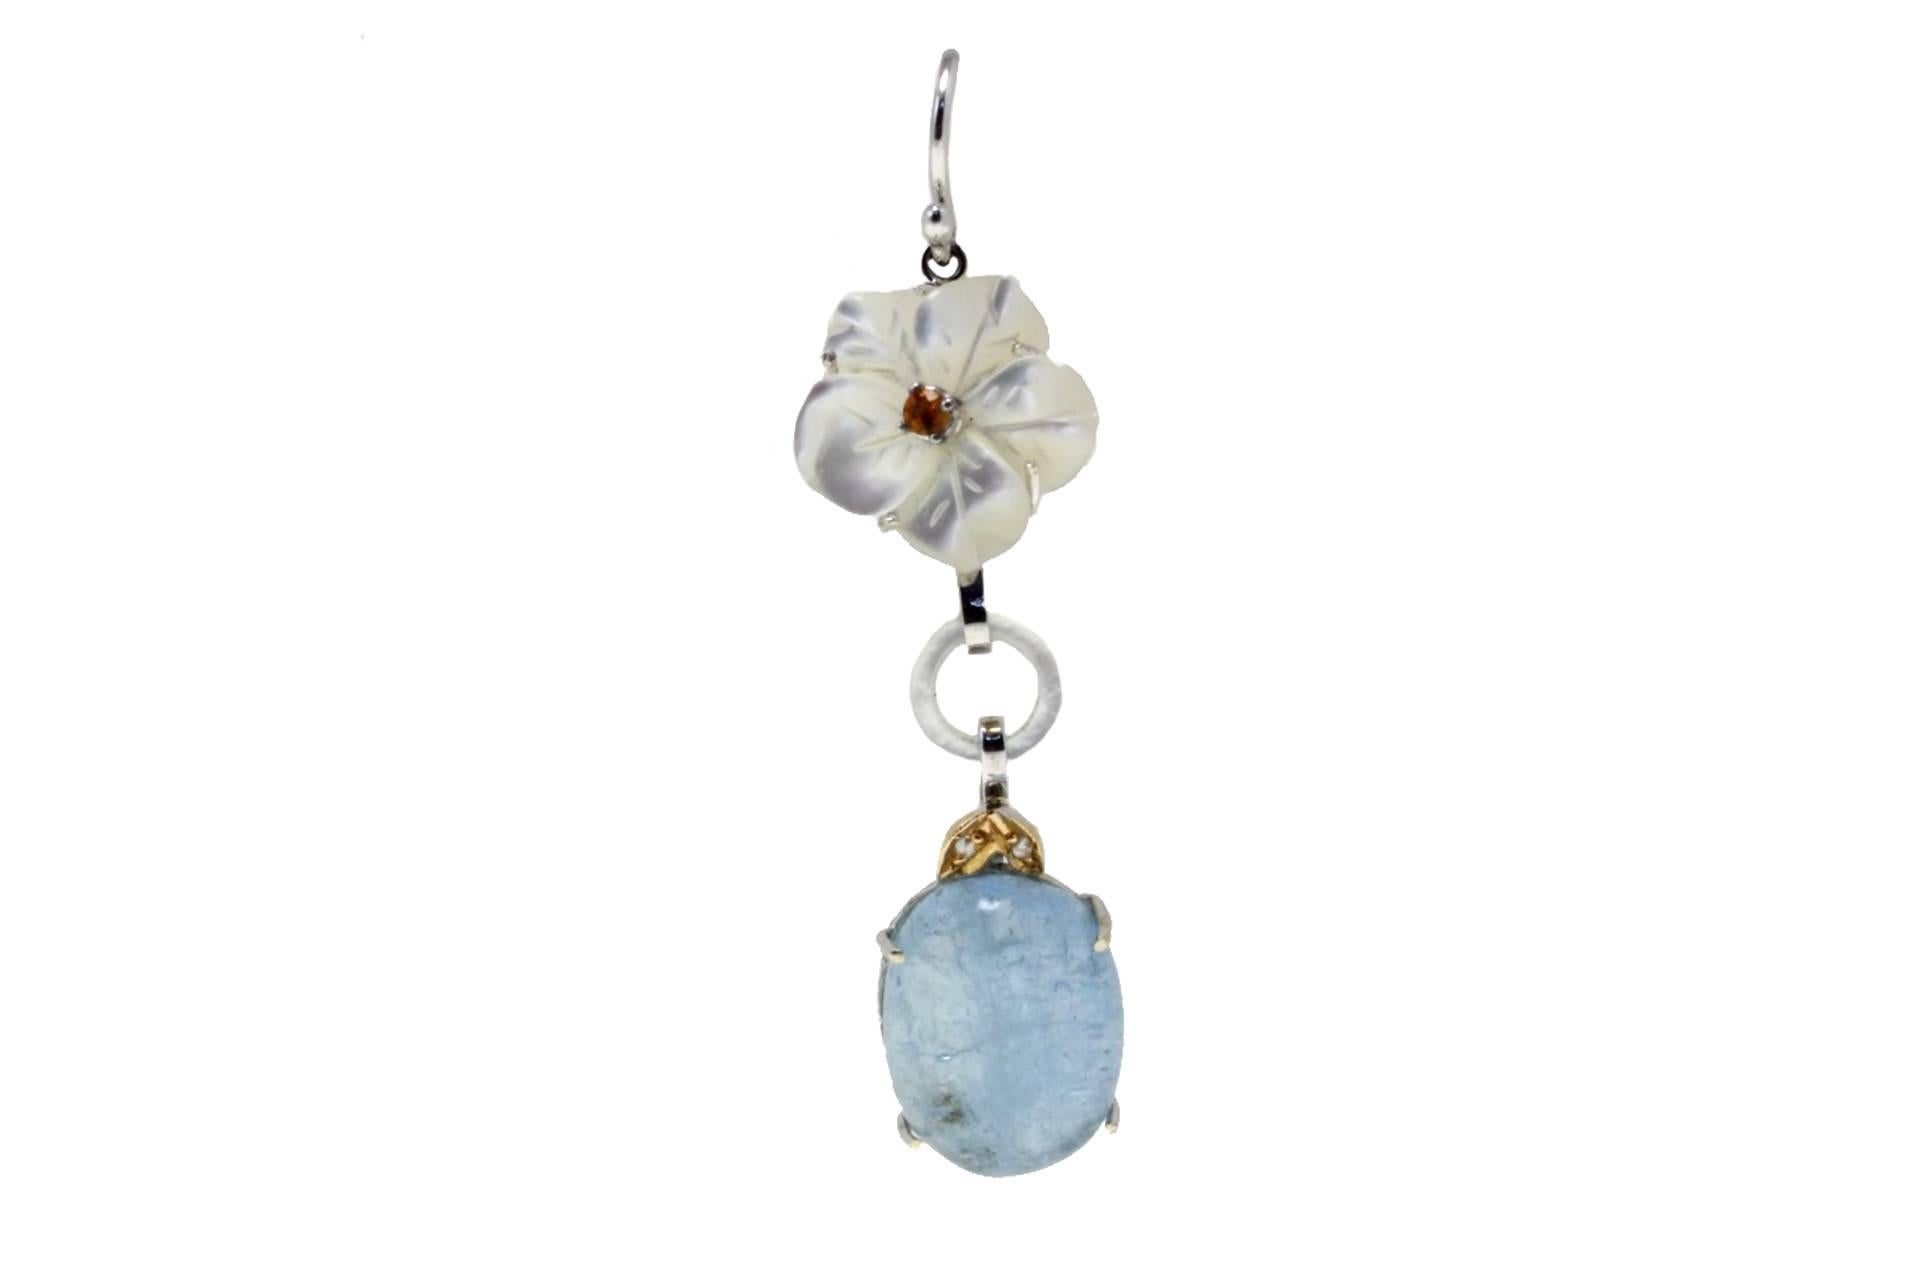 SHIPPING POLICY: 
No additional costs will be added to this order. 
Shipping costs will be totally covered by the seller (customs duties included).

Dangle earrings in 14kt white and yellow gold composed of a white stone flower with a central topaz